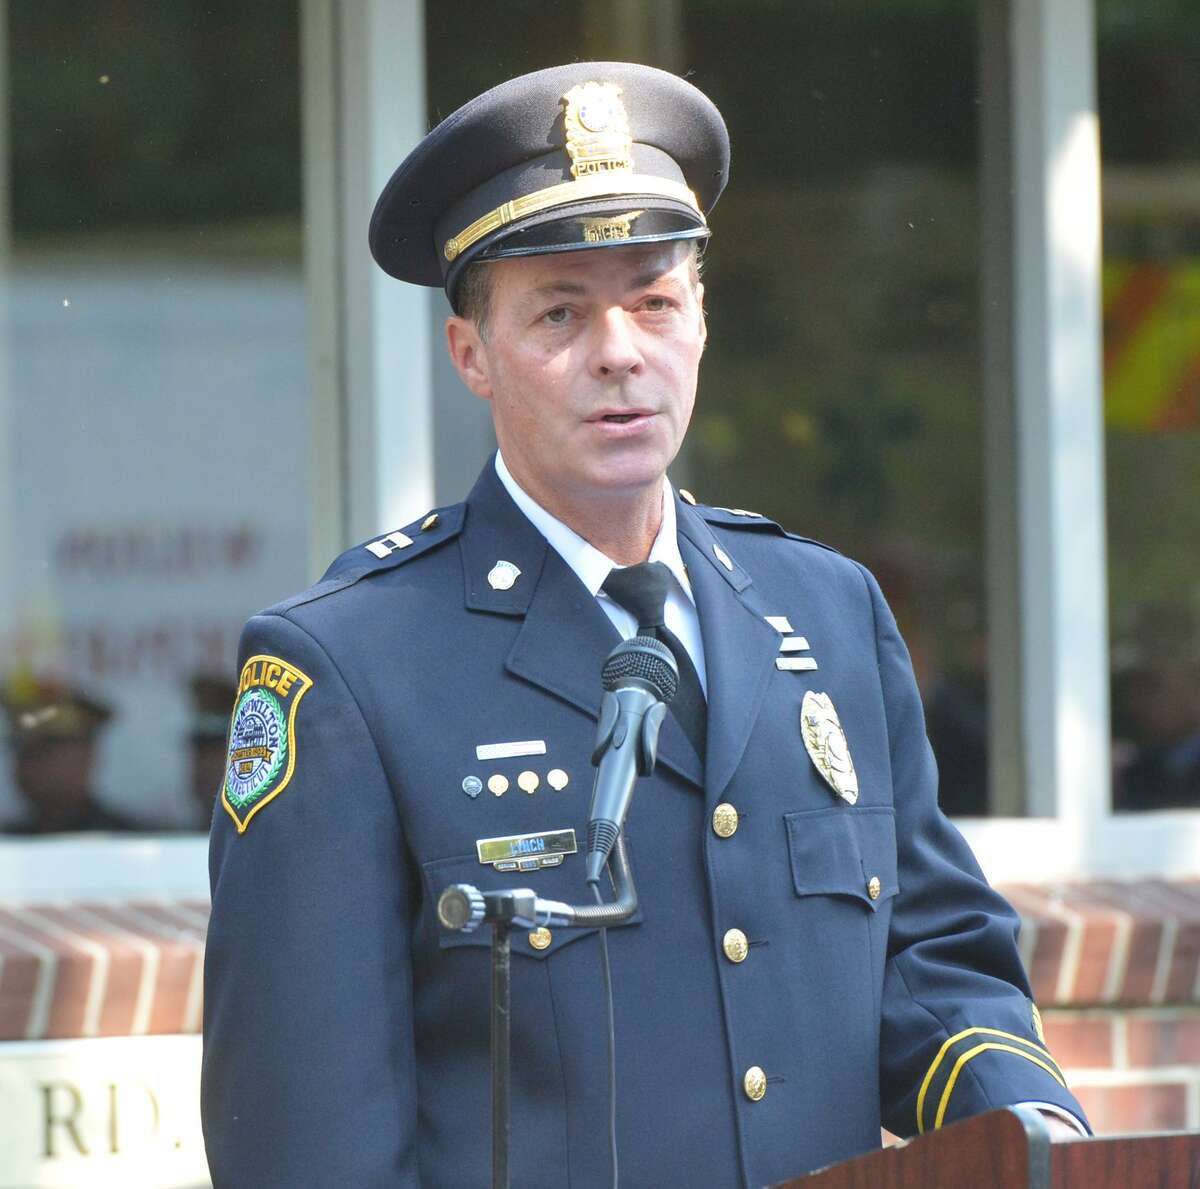 Capt. John Lynch speaks during the Wilton 15th Annual 9/11 Memorial Service held at Wilton.